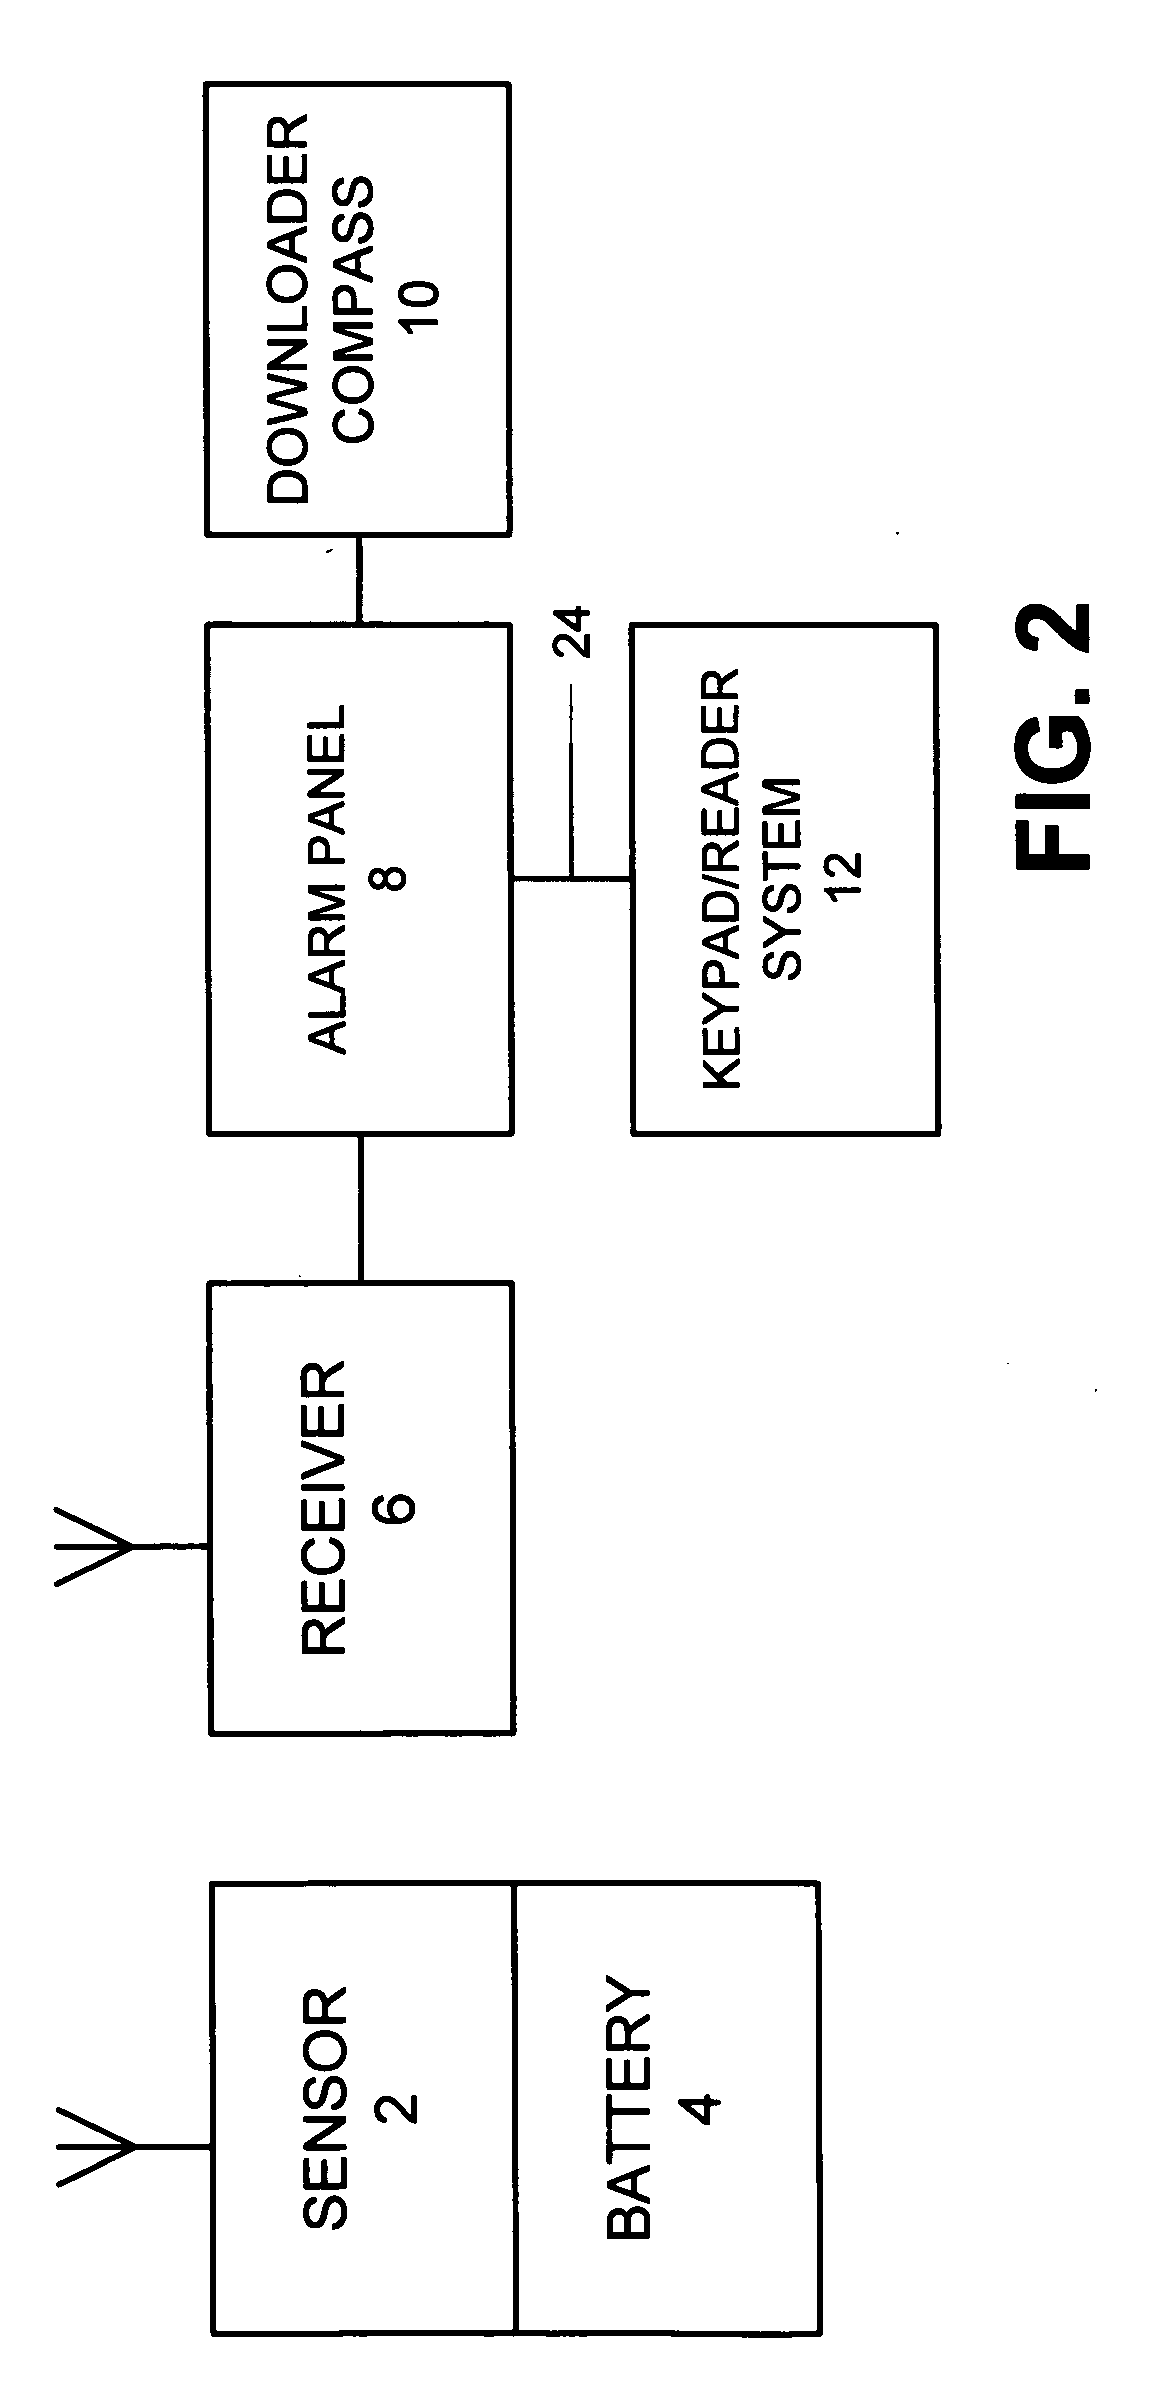 Security system access control and method